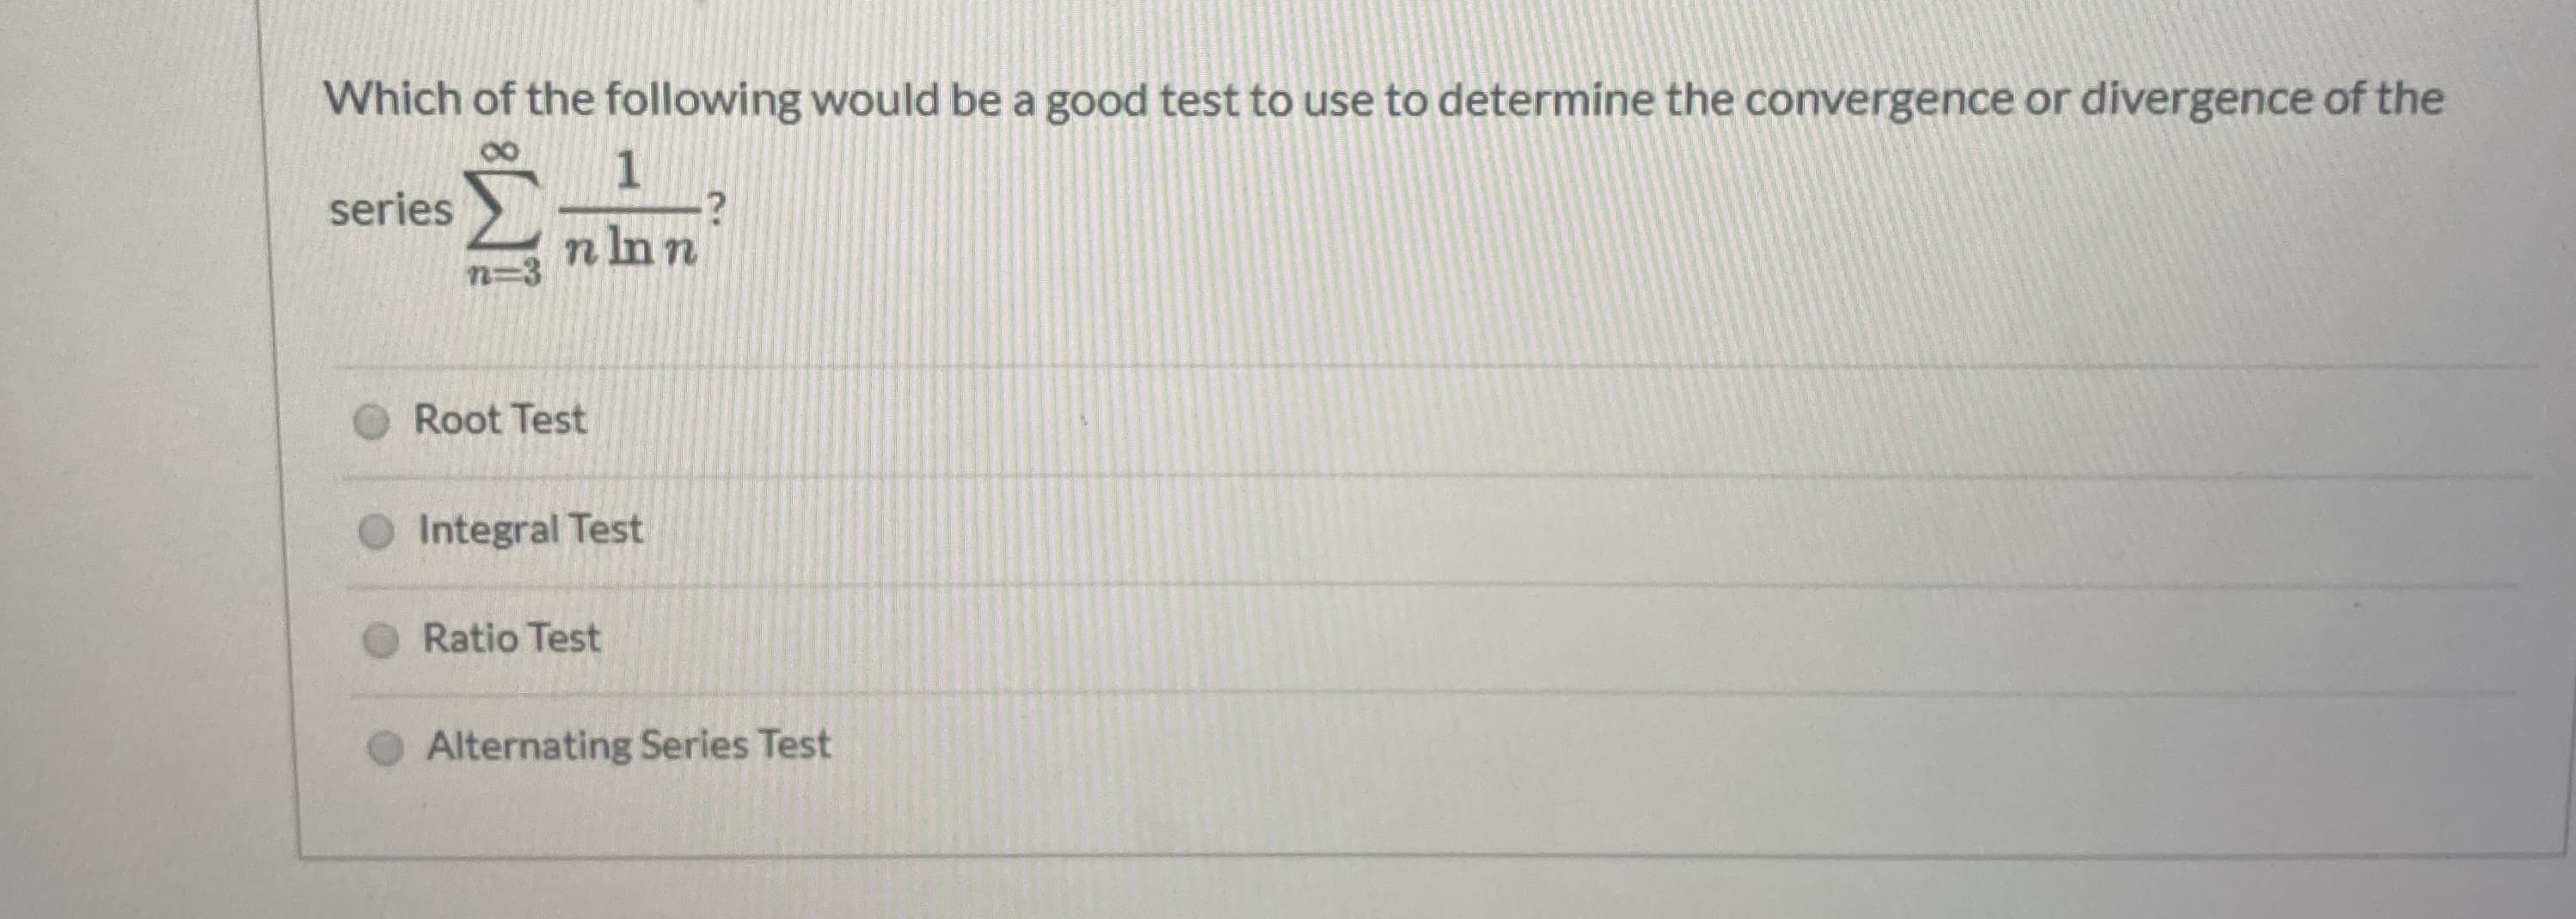 Which of the following would be a good test to use to determíne the convergence or divergence of the
1
series
u UT u
n=3
Root Test
O Integral Test
Ratio Test
Alternating Series Test
